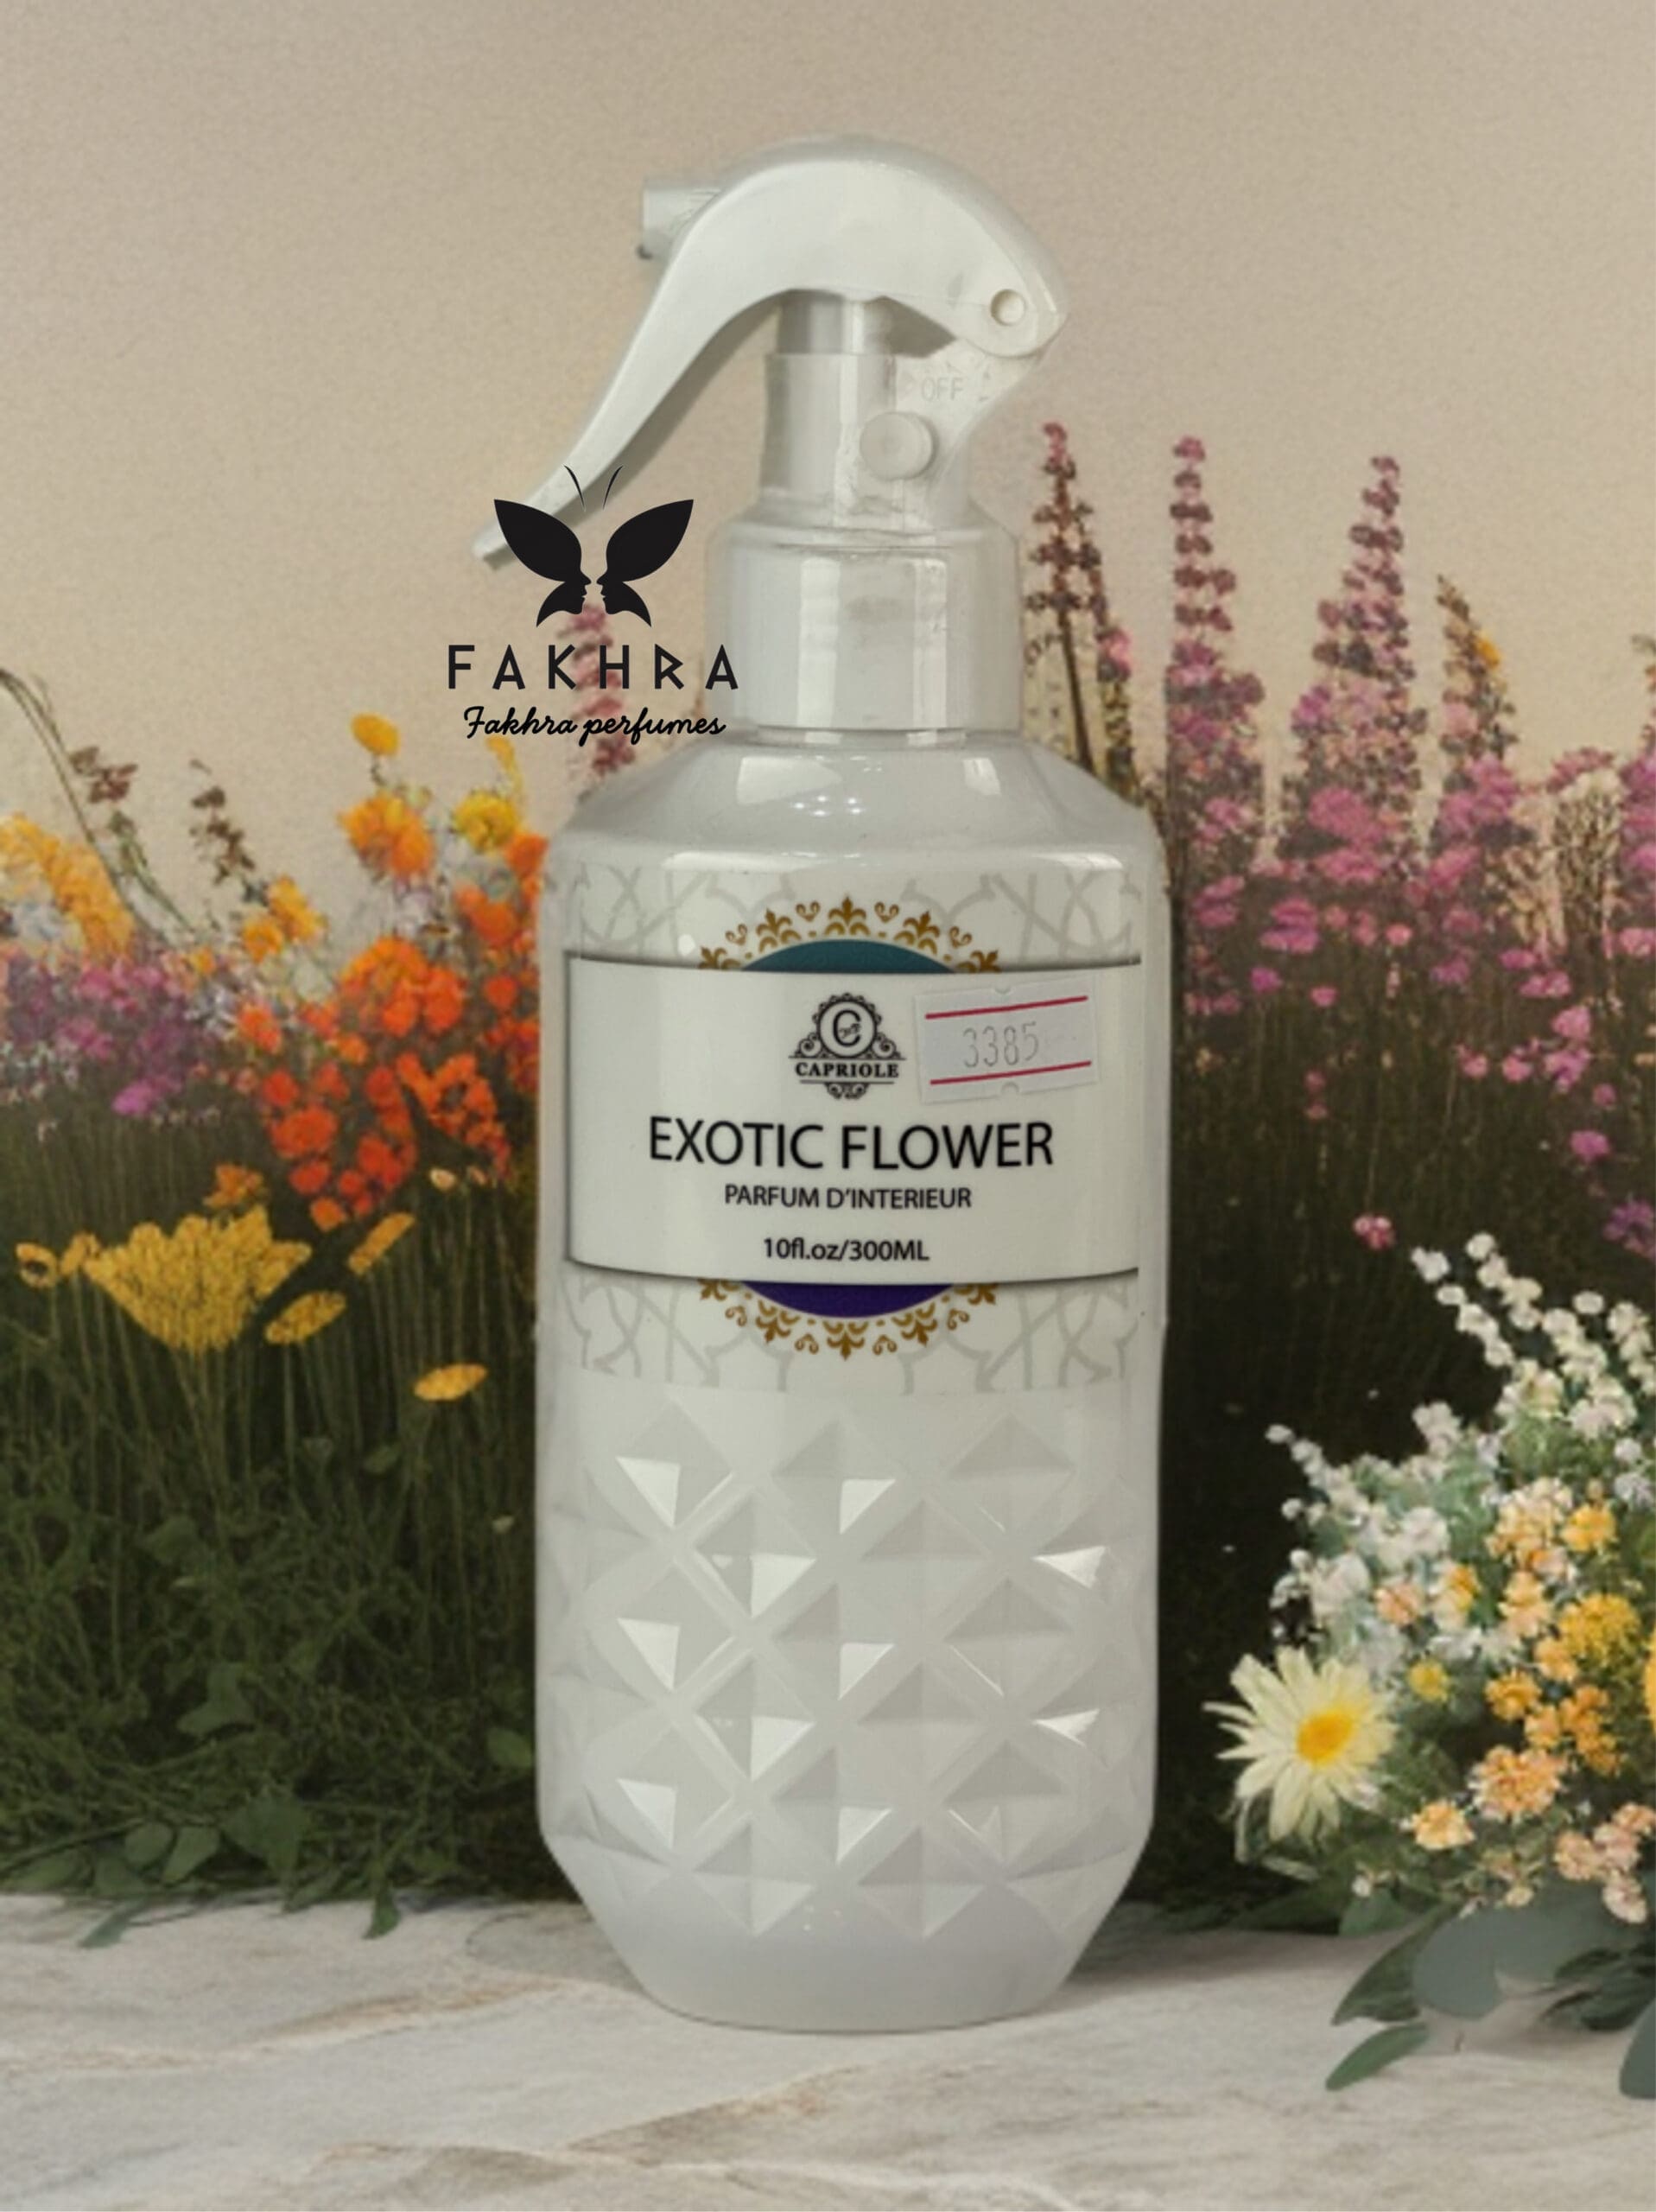 3385 Capriole EXOTIC FLOWER Home perfume 300 ml